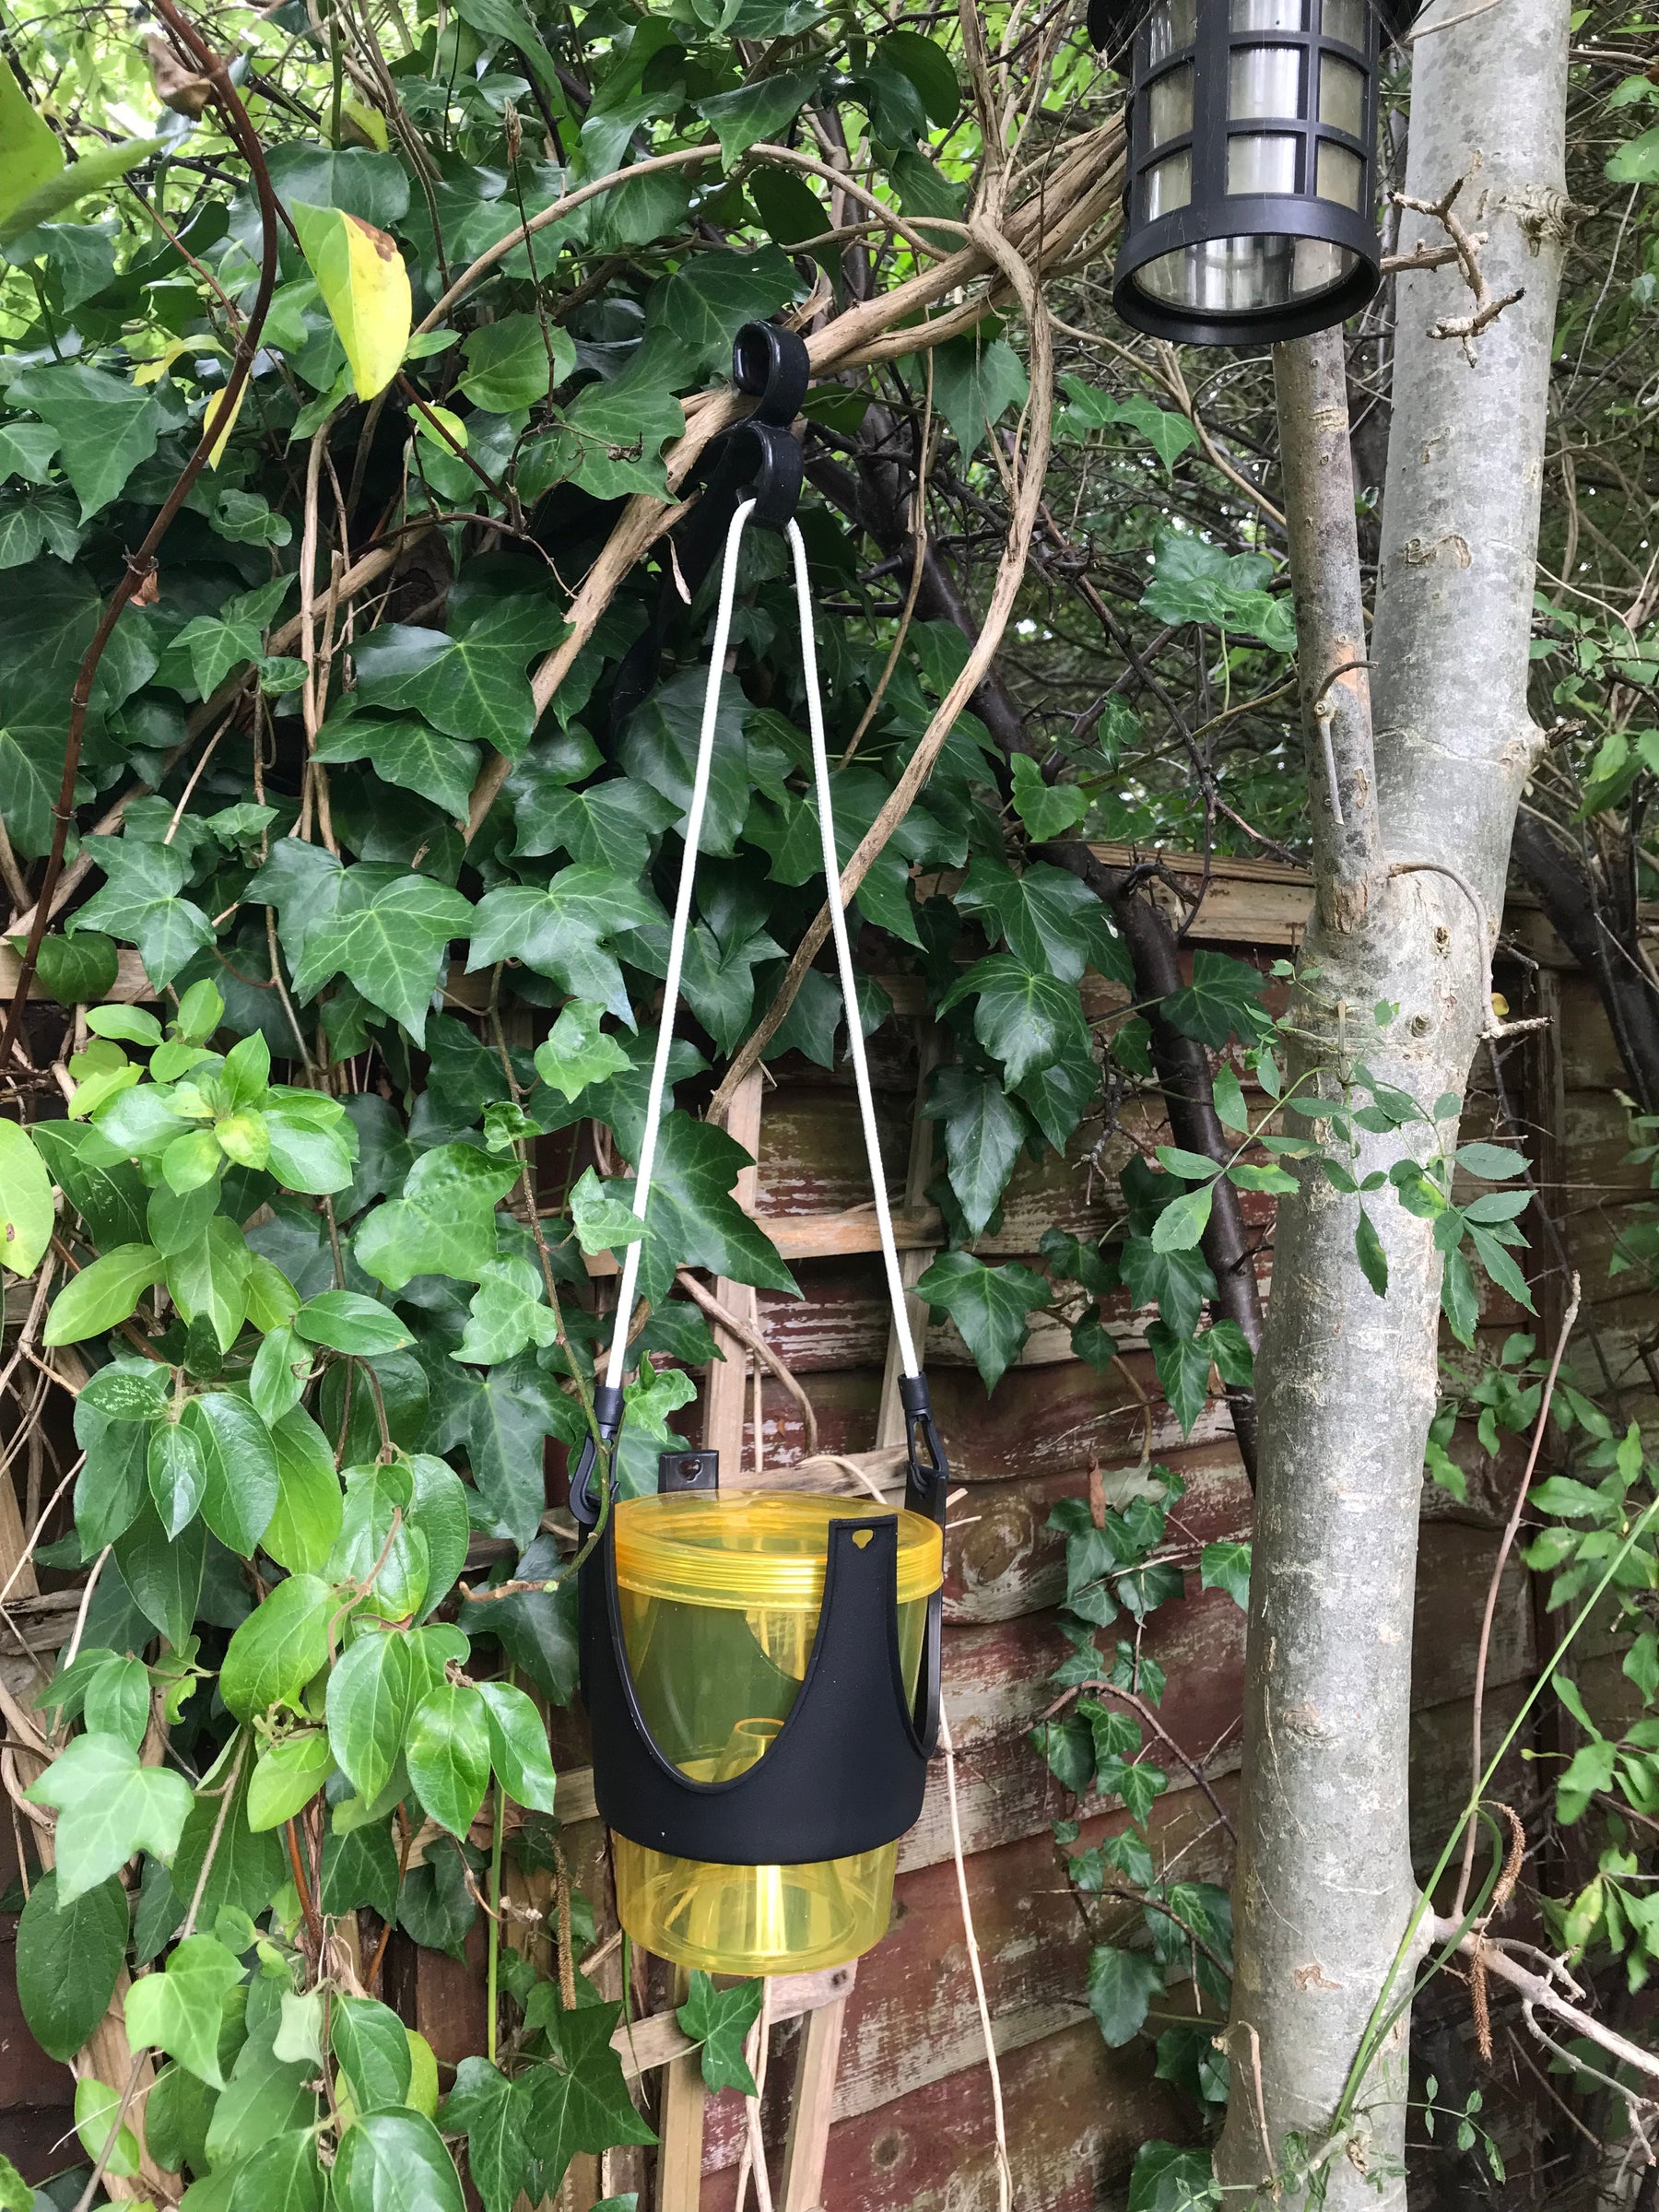 Photo of a wasp trap hanging from a tree branch outside.